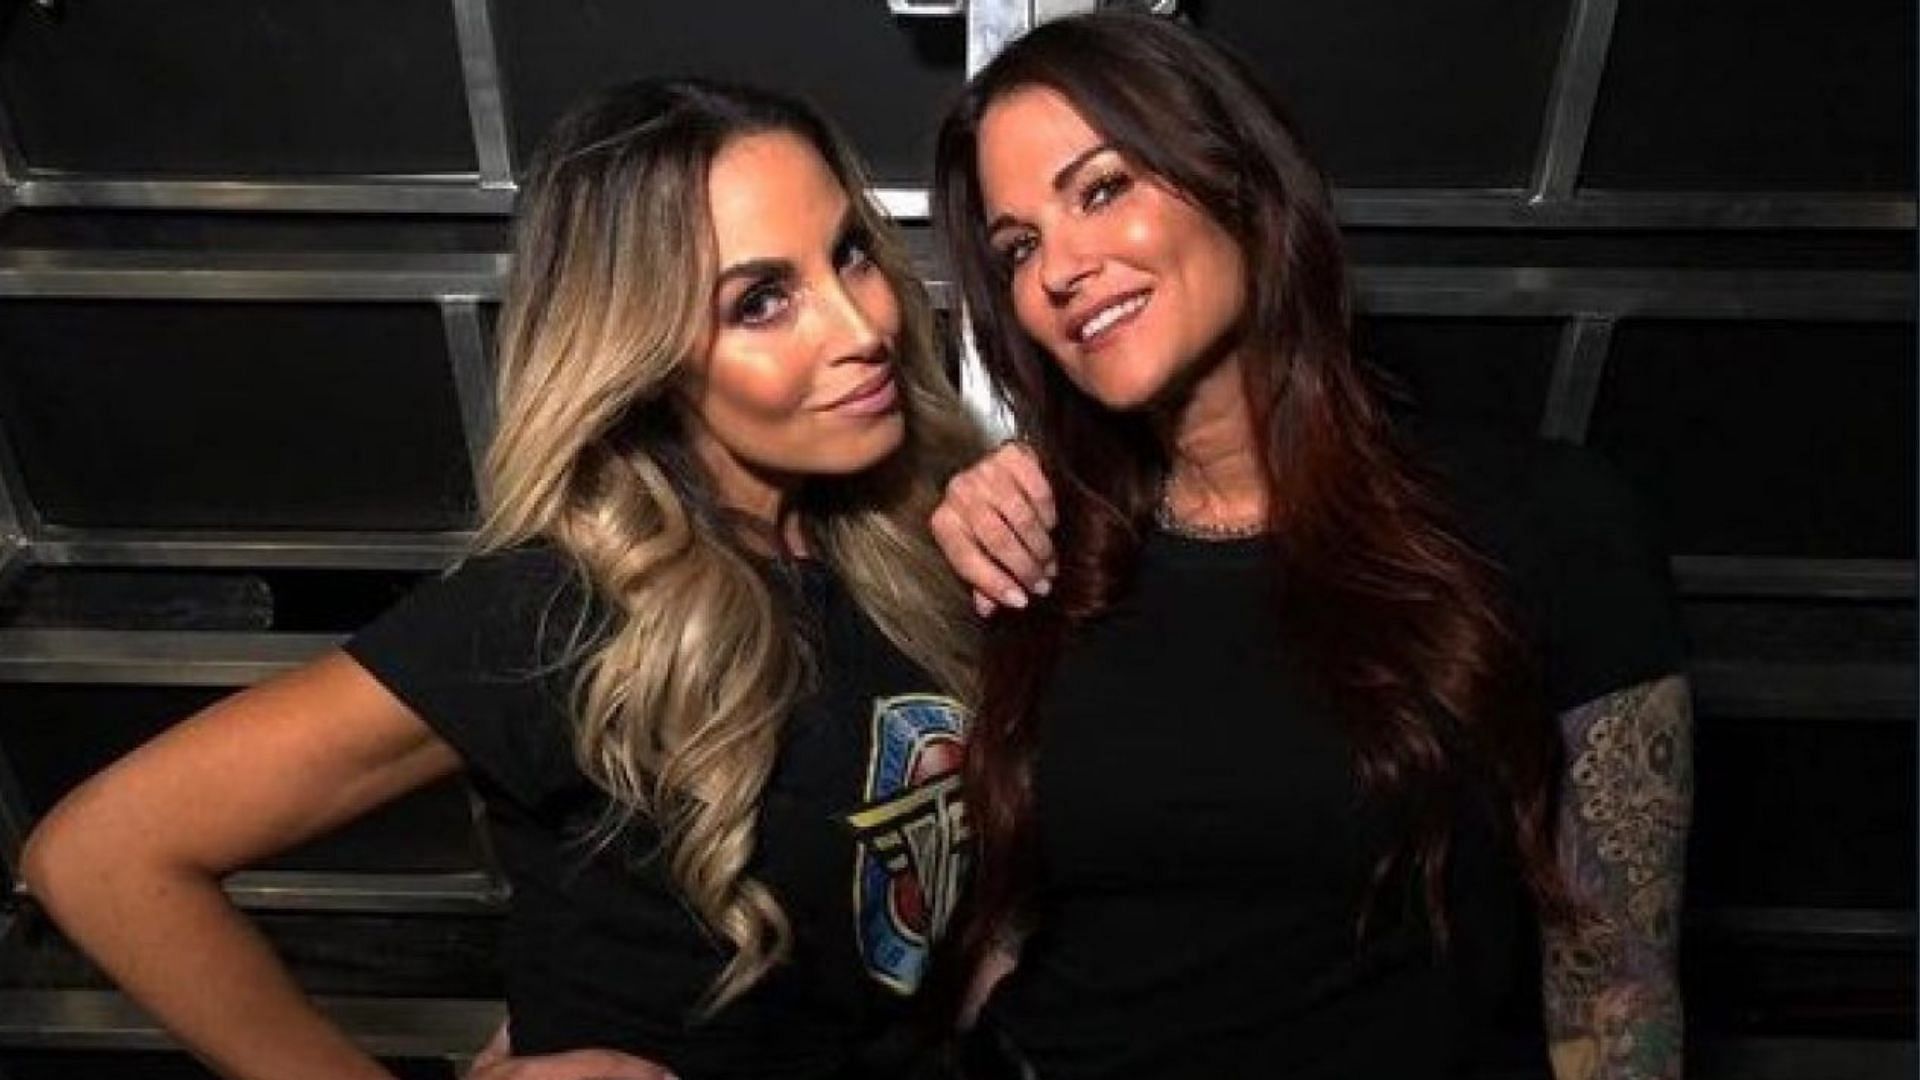 What does the future have in store for Lita and Trish Stratus?